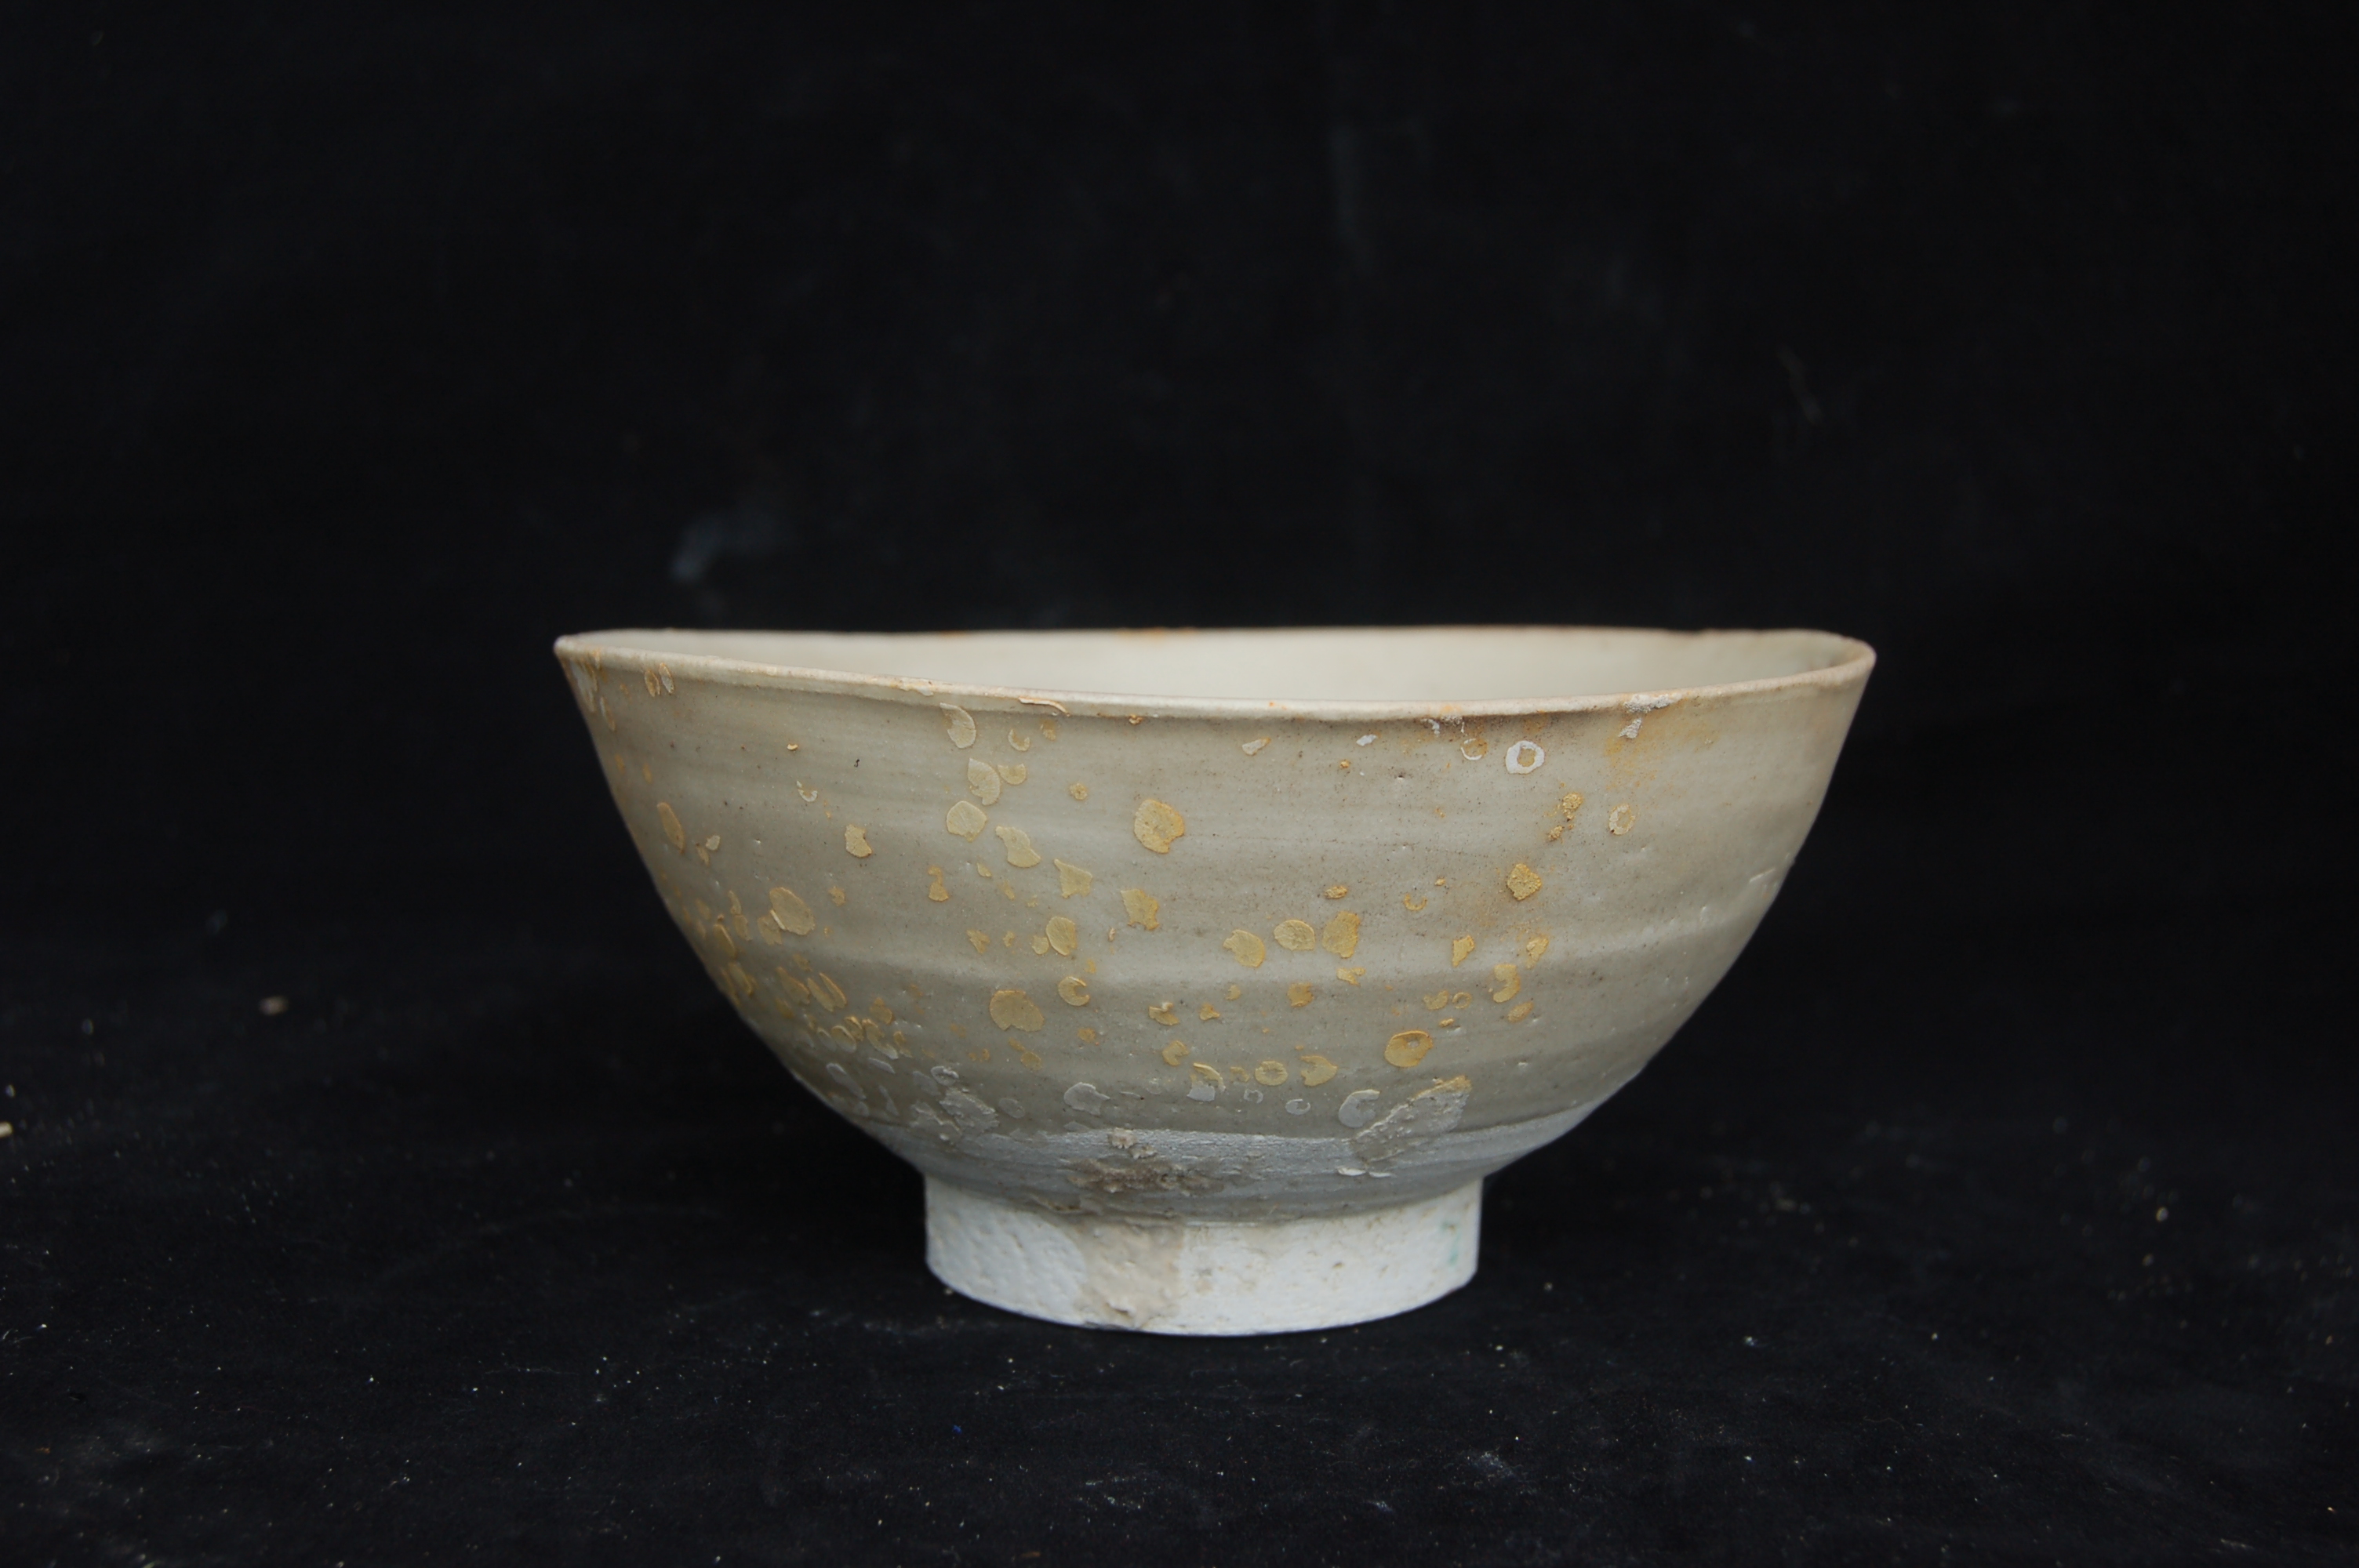 Plain bowl with a straight rim, incised ring in the well, rounded wall and a high carved foot-ring. Diameter 16 cm, height 7.5 cm.